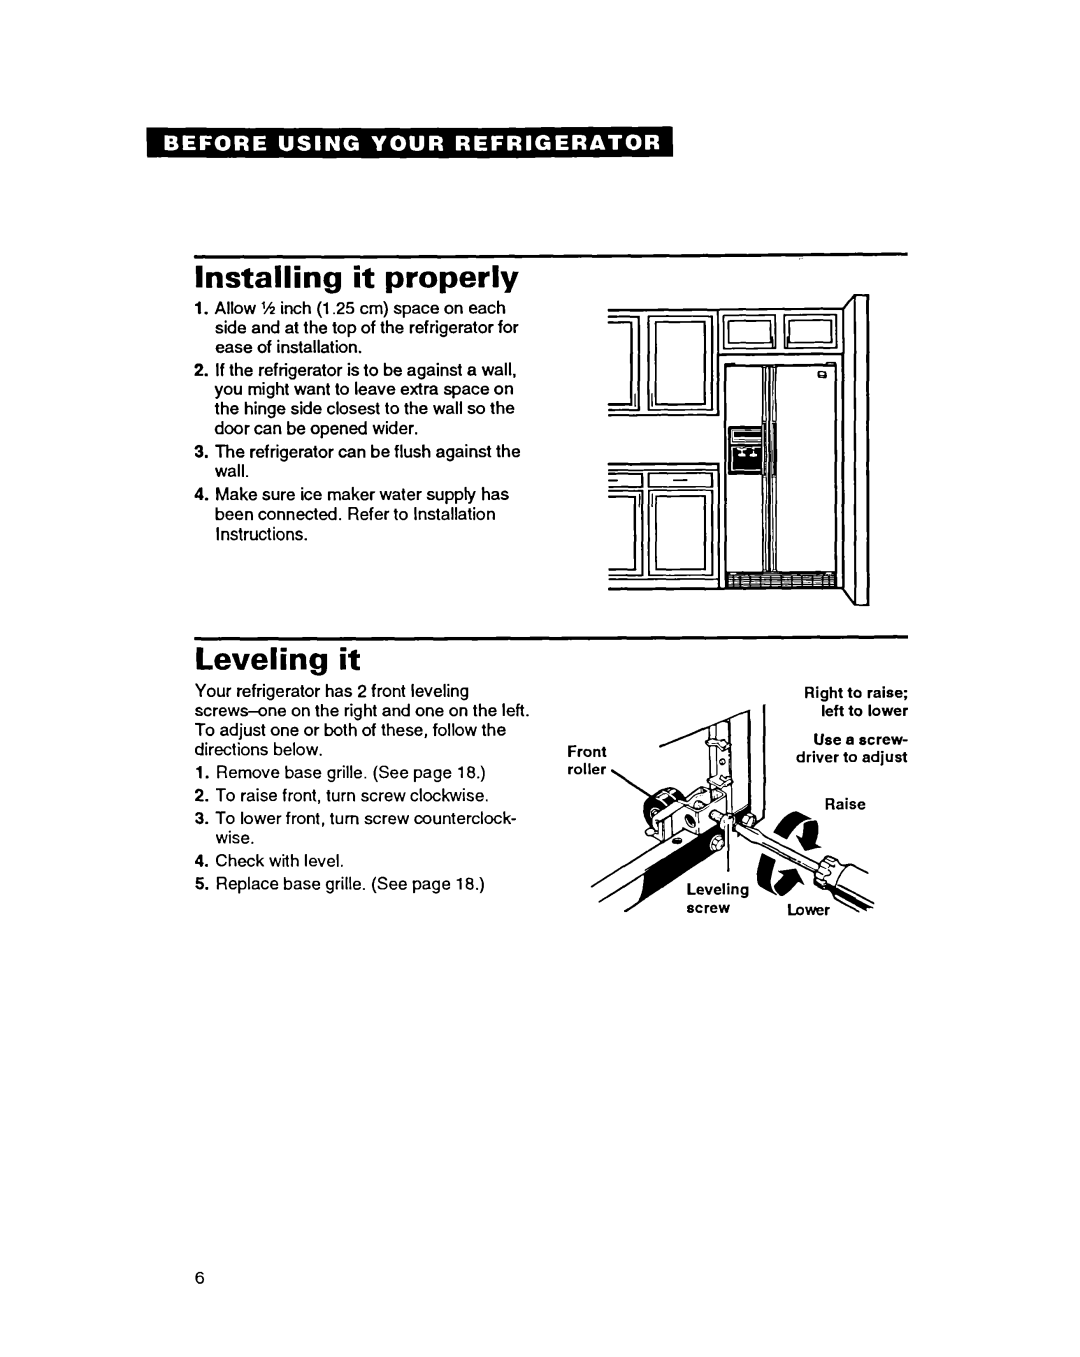 Whirlpool ED22PC important safety instructions Installing it properly, Leveling it 